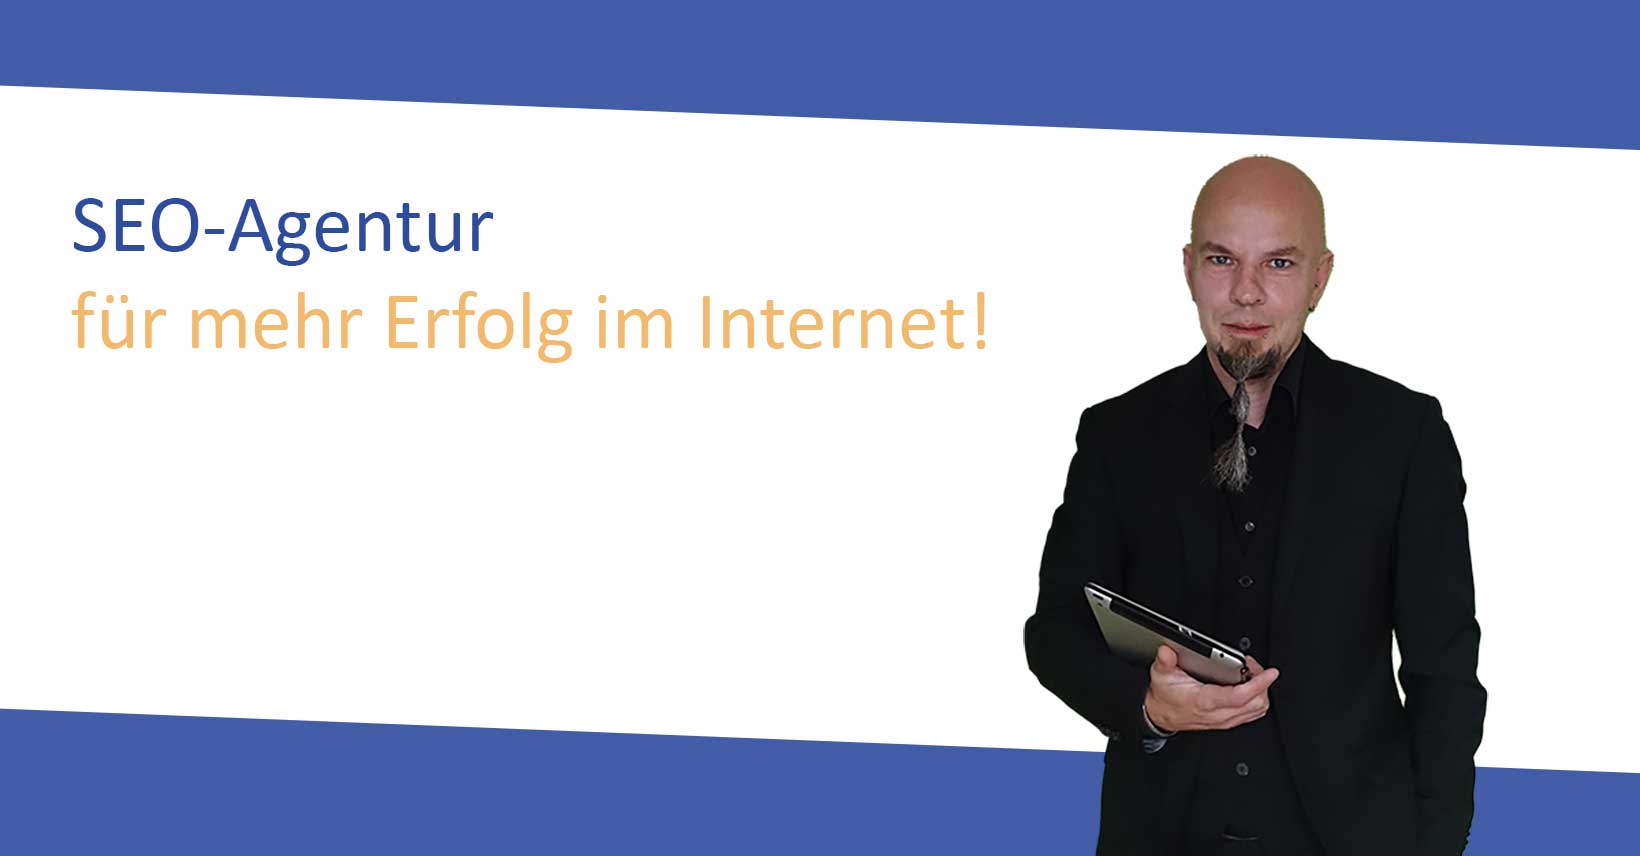 The Best Guide To Seo Agentur